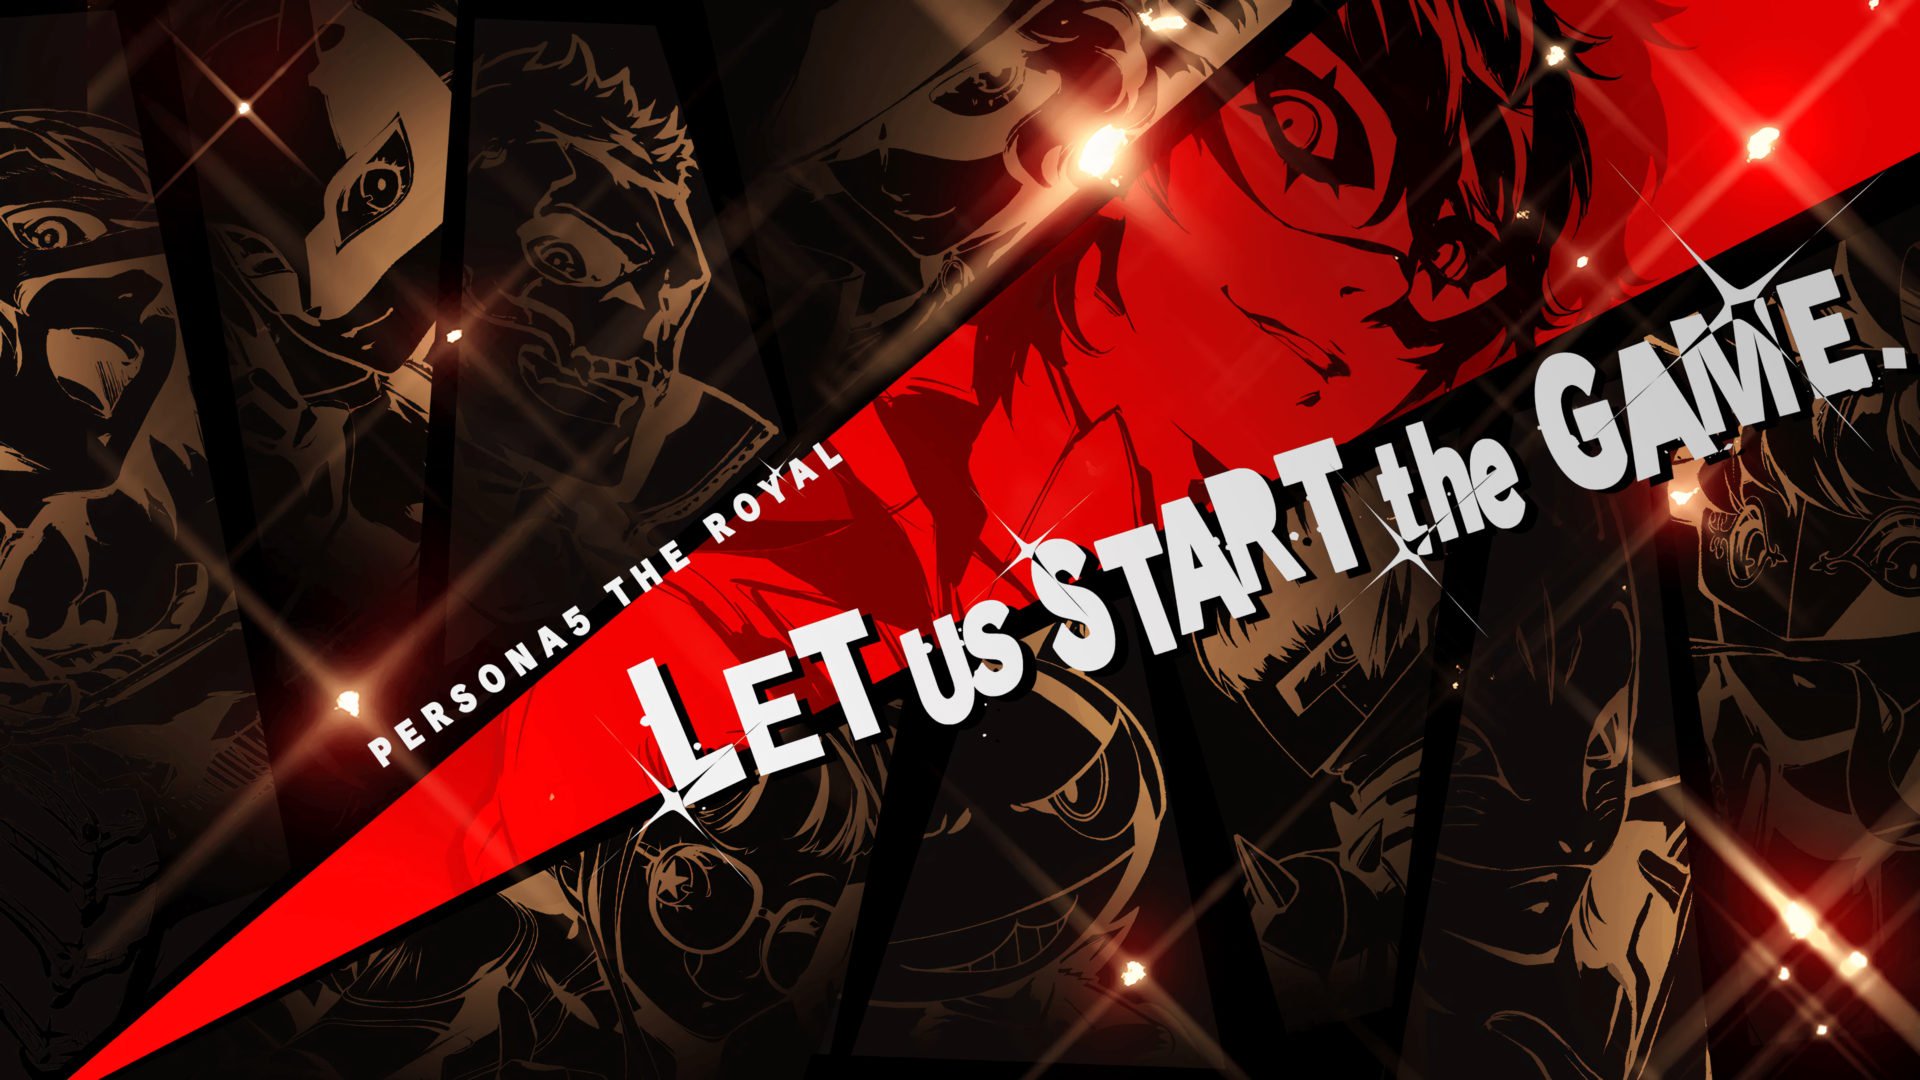 4k Hd Persona 5 Wallpapers You Need To Make Your Desktop Background